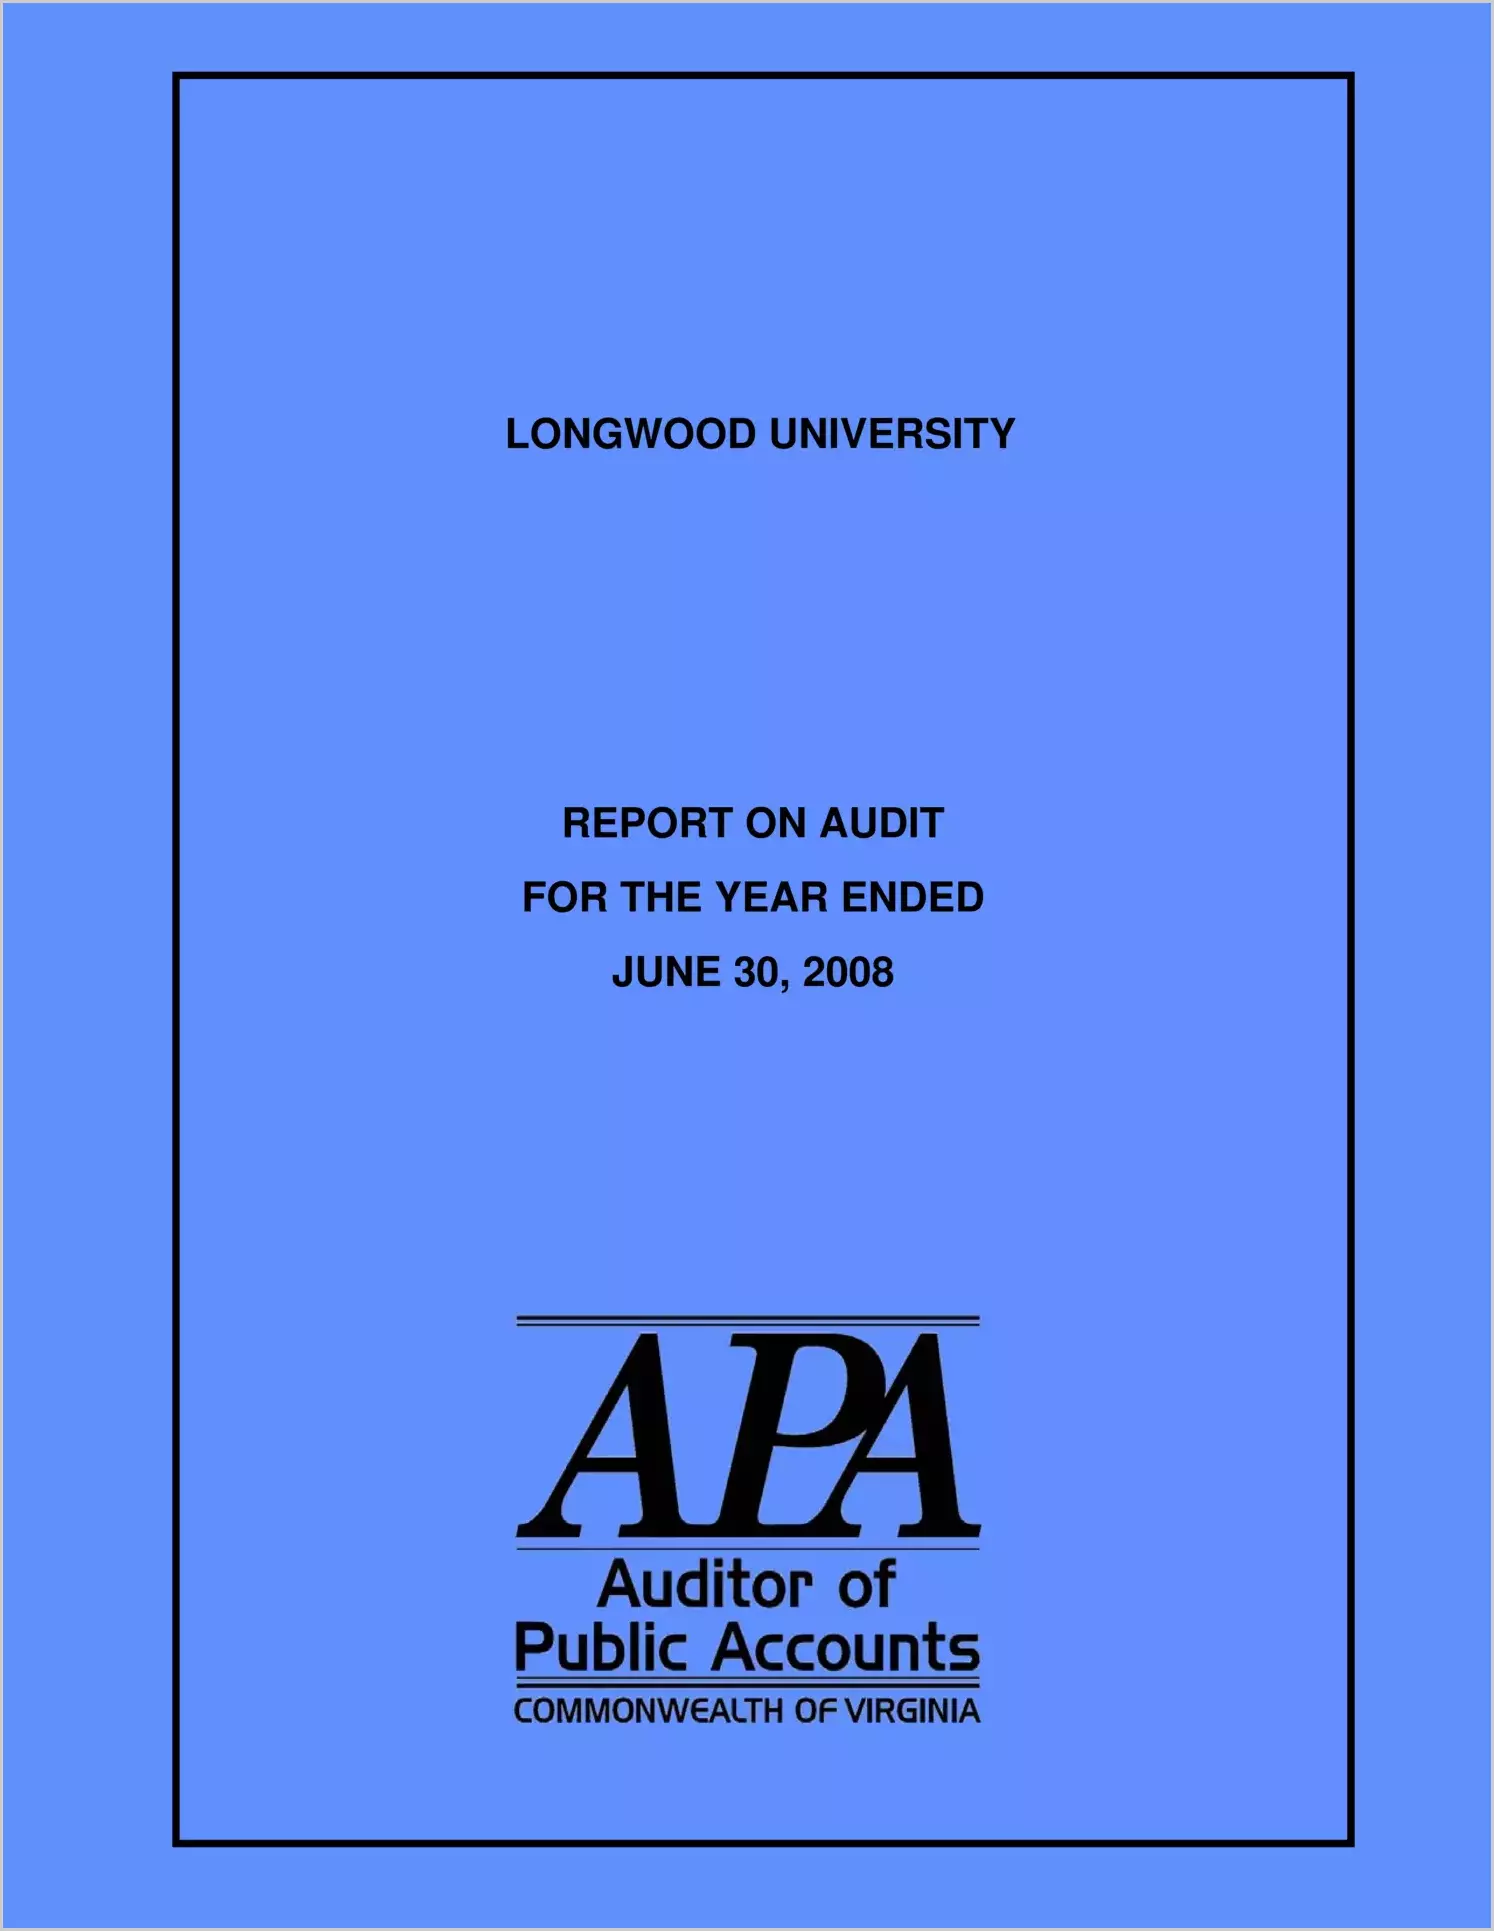 Longwood University report on audit for the year ended June 30, 2008